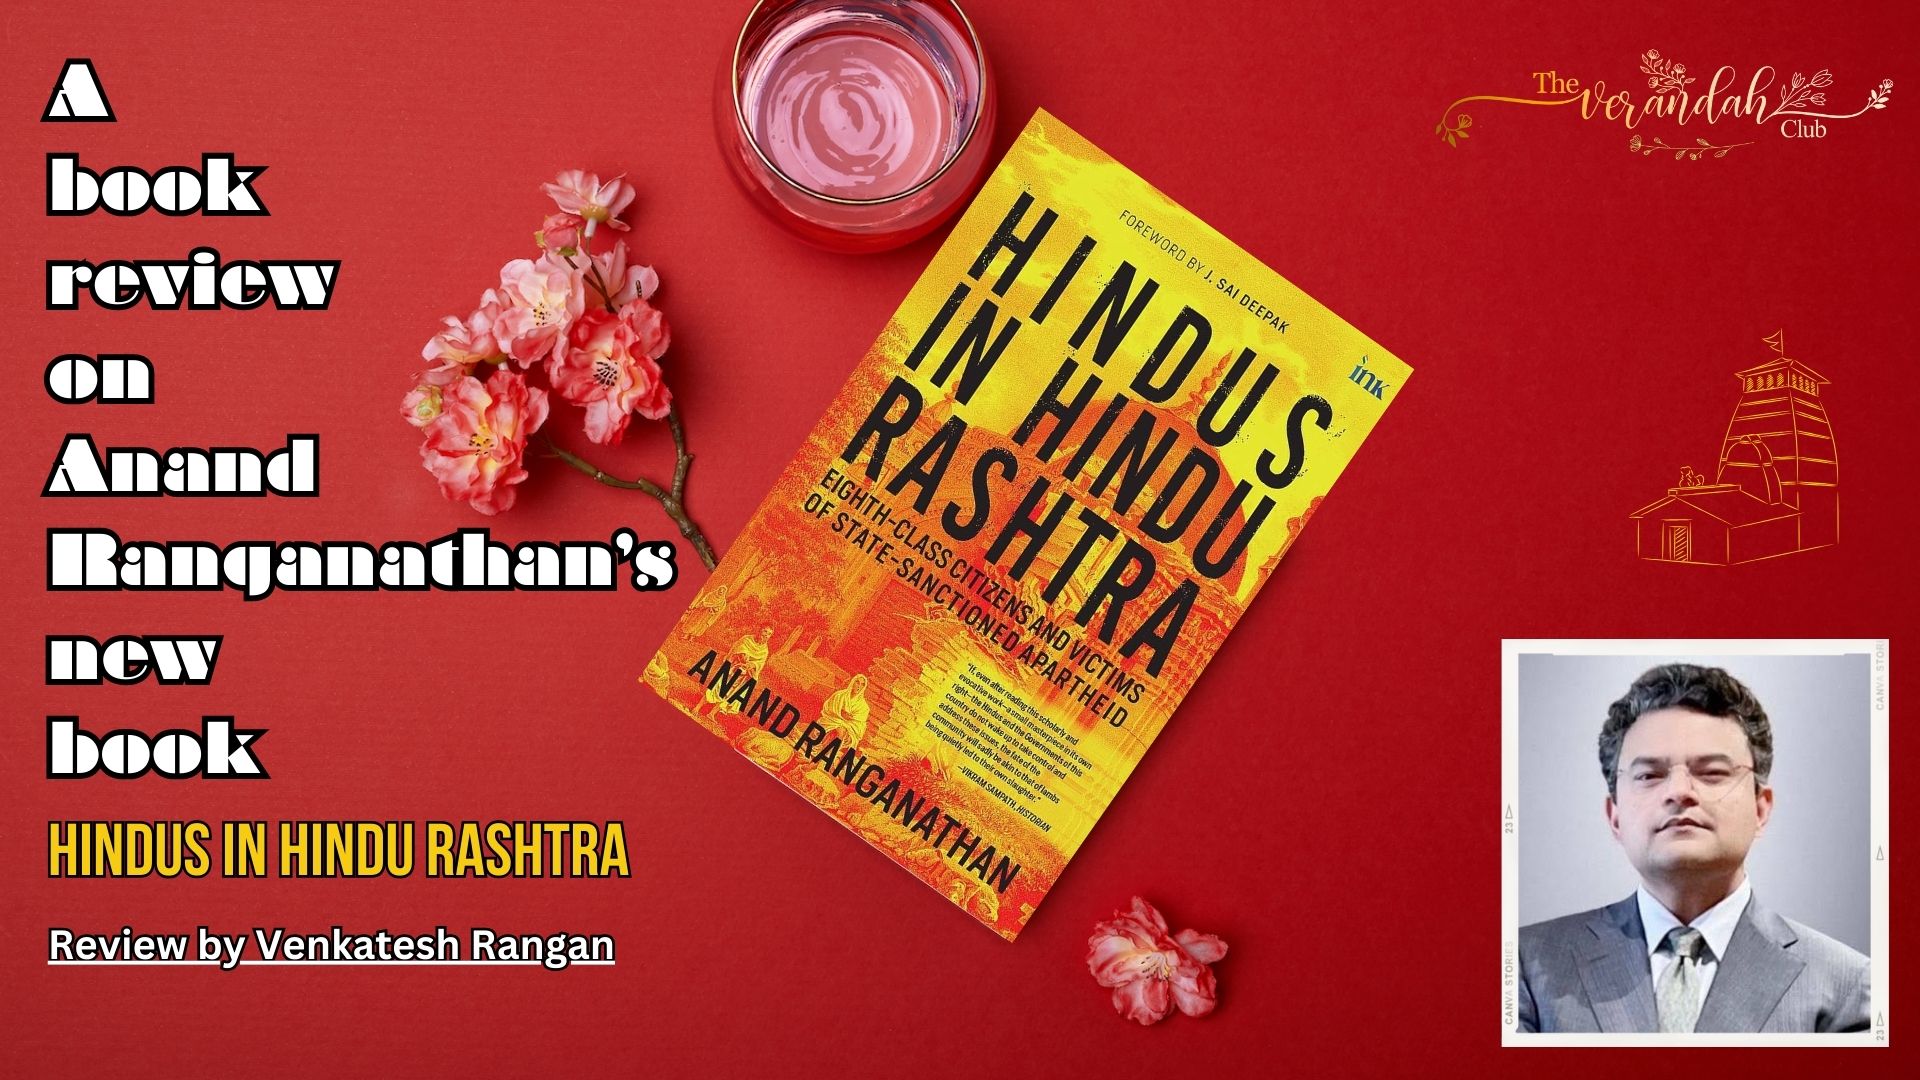 A book review on Hindus in Hindu Rashtra